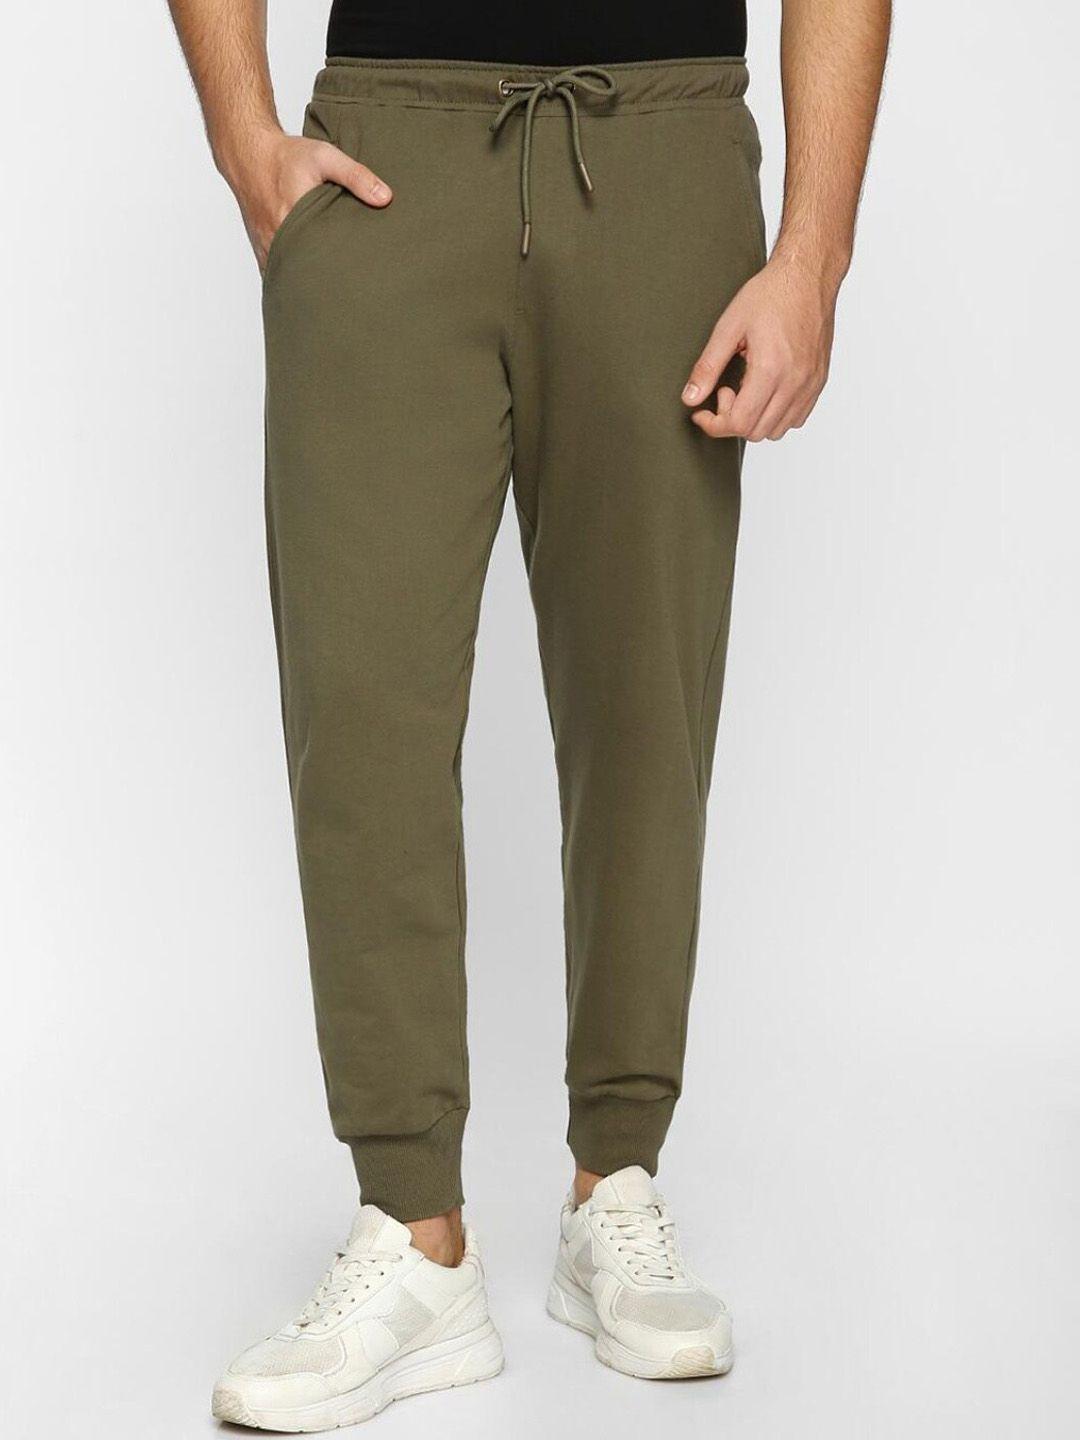 bewakoof men olive green relaxed fit mid rise  joggers